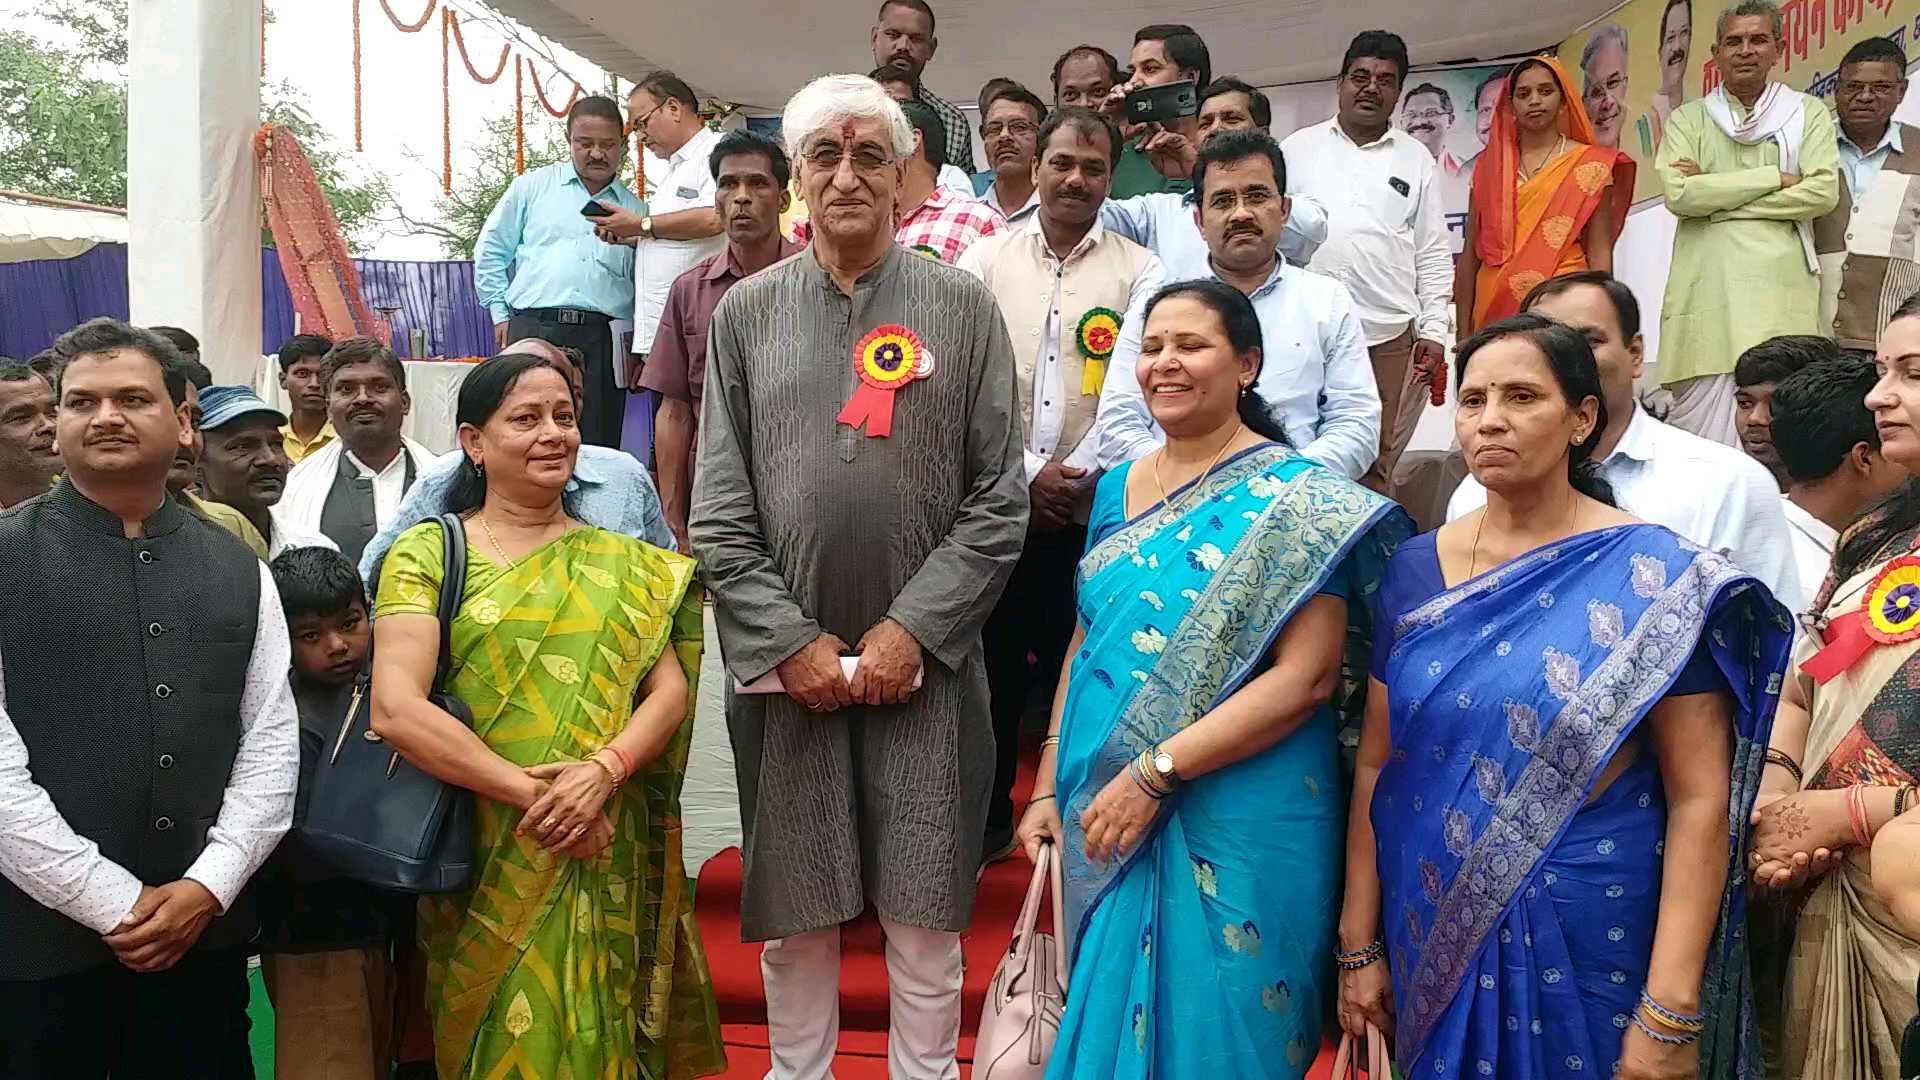 TS Singhdev posing for photographs with women at the event